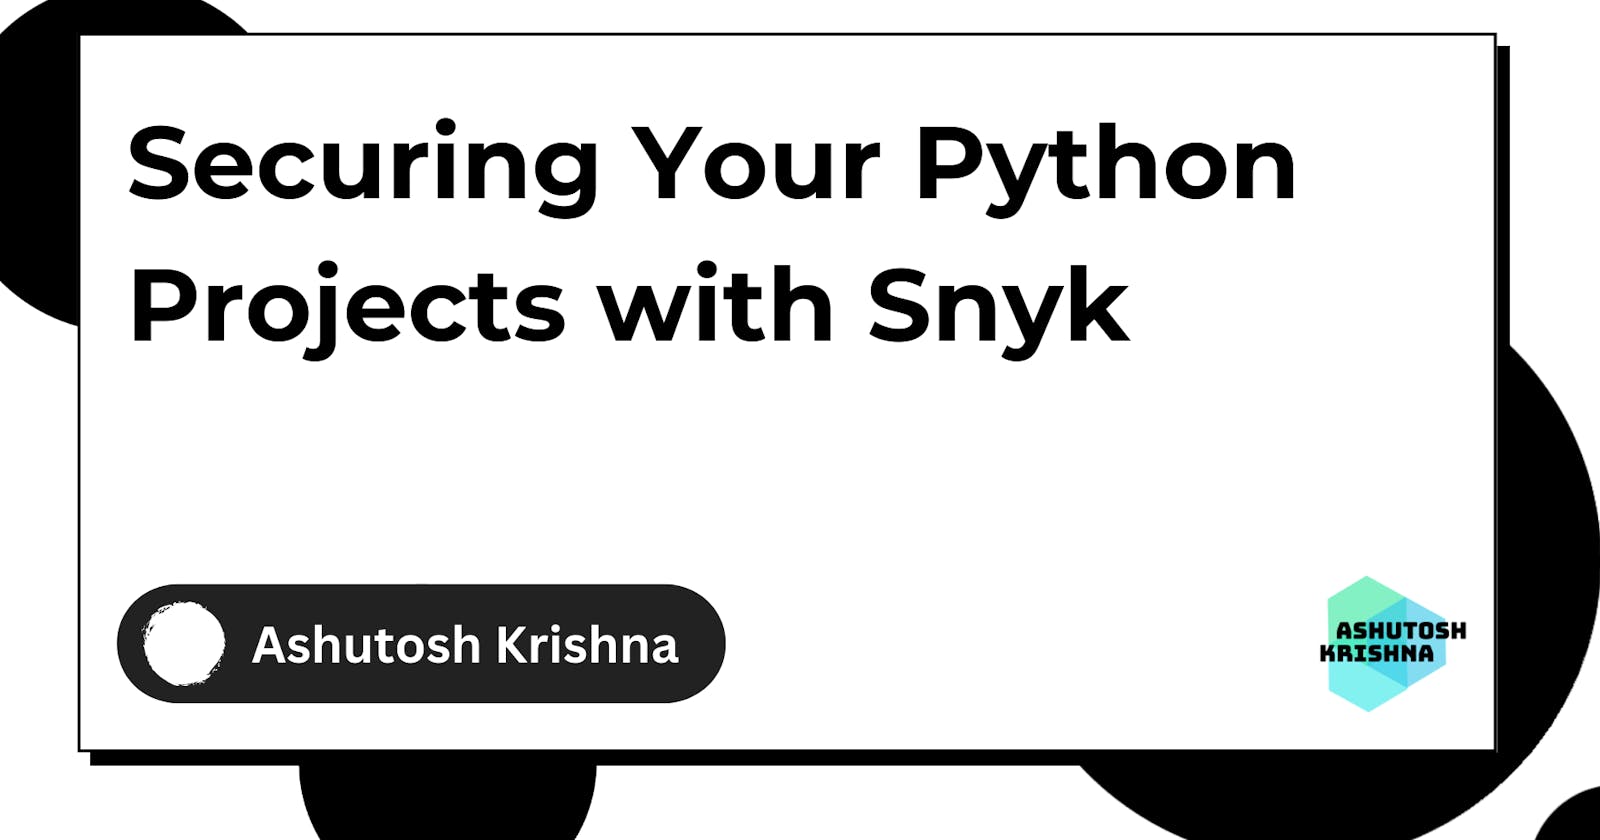 Securing Your Python Projects with Snyk